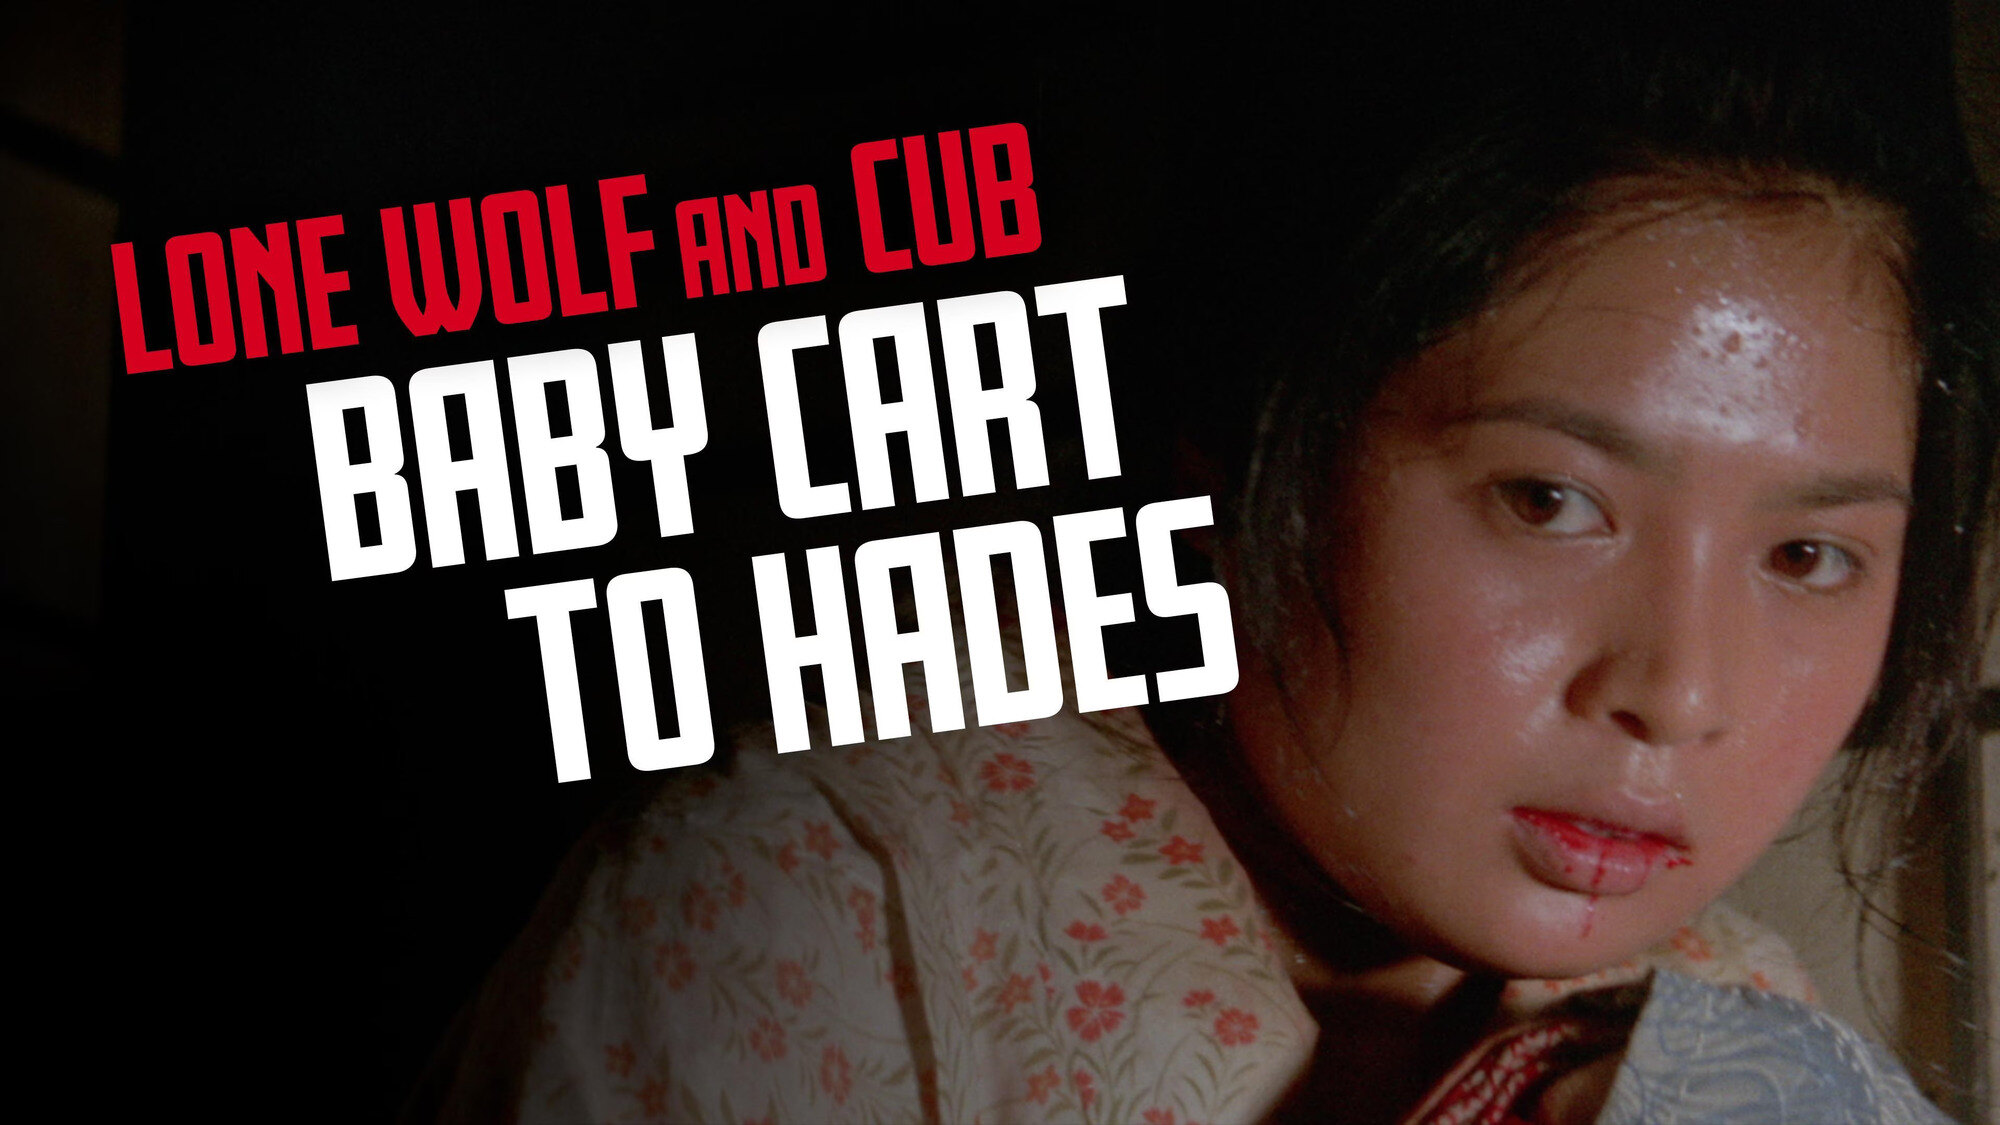 35-facts-about-the-movie-lone-wolf-and-cub-baby-cart-to-hades